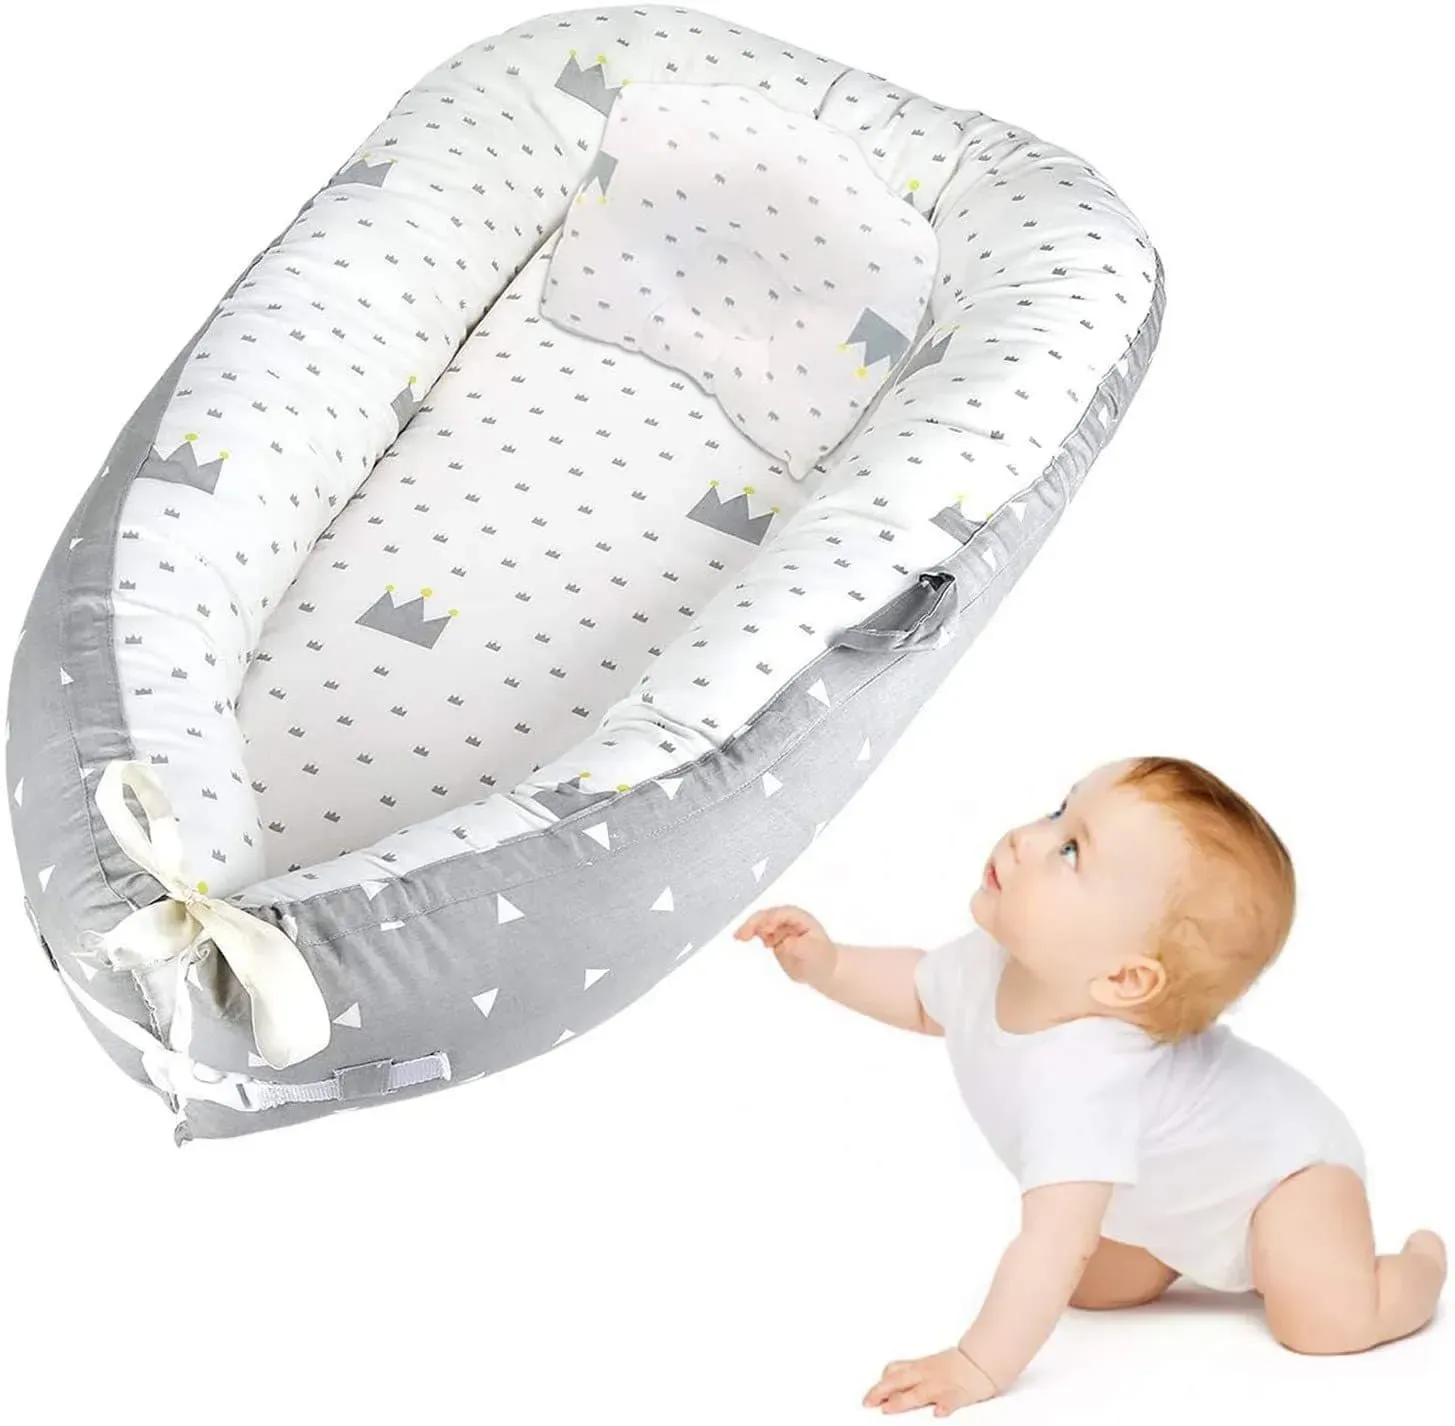 Comfortable white grey baby lounger with crow ang triangle design.